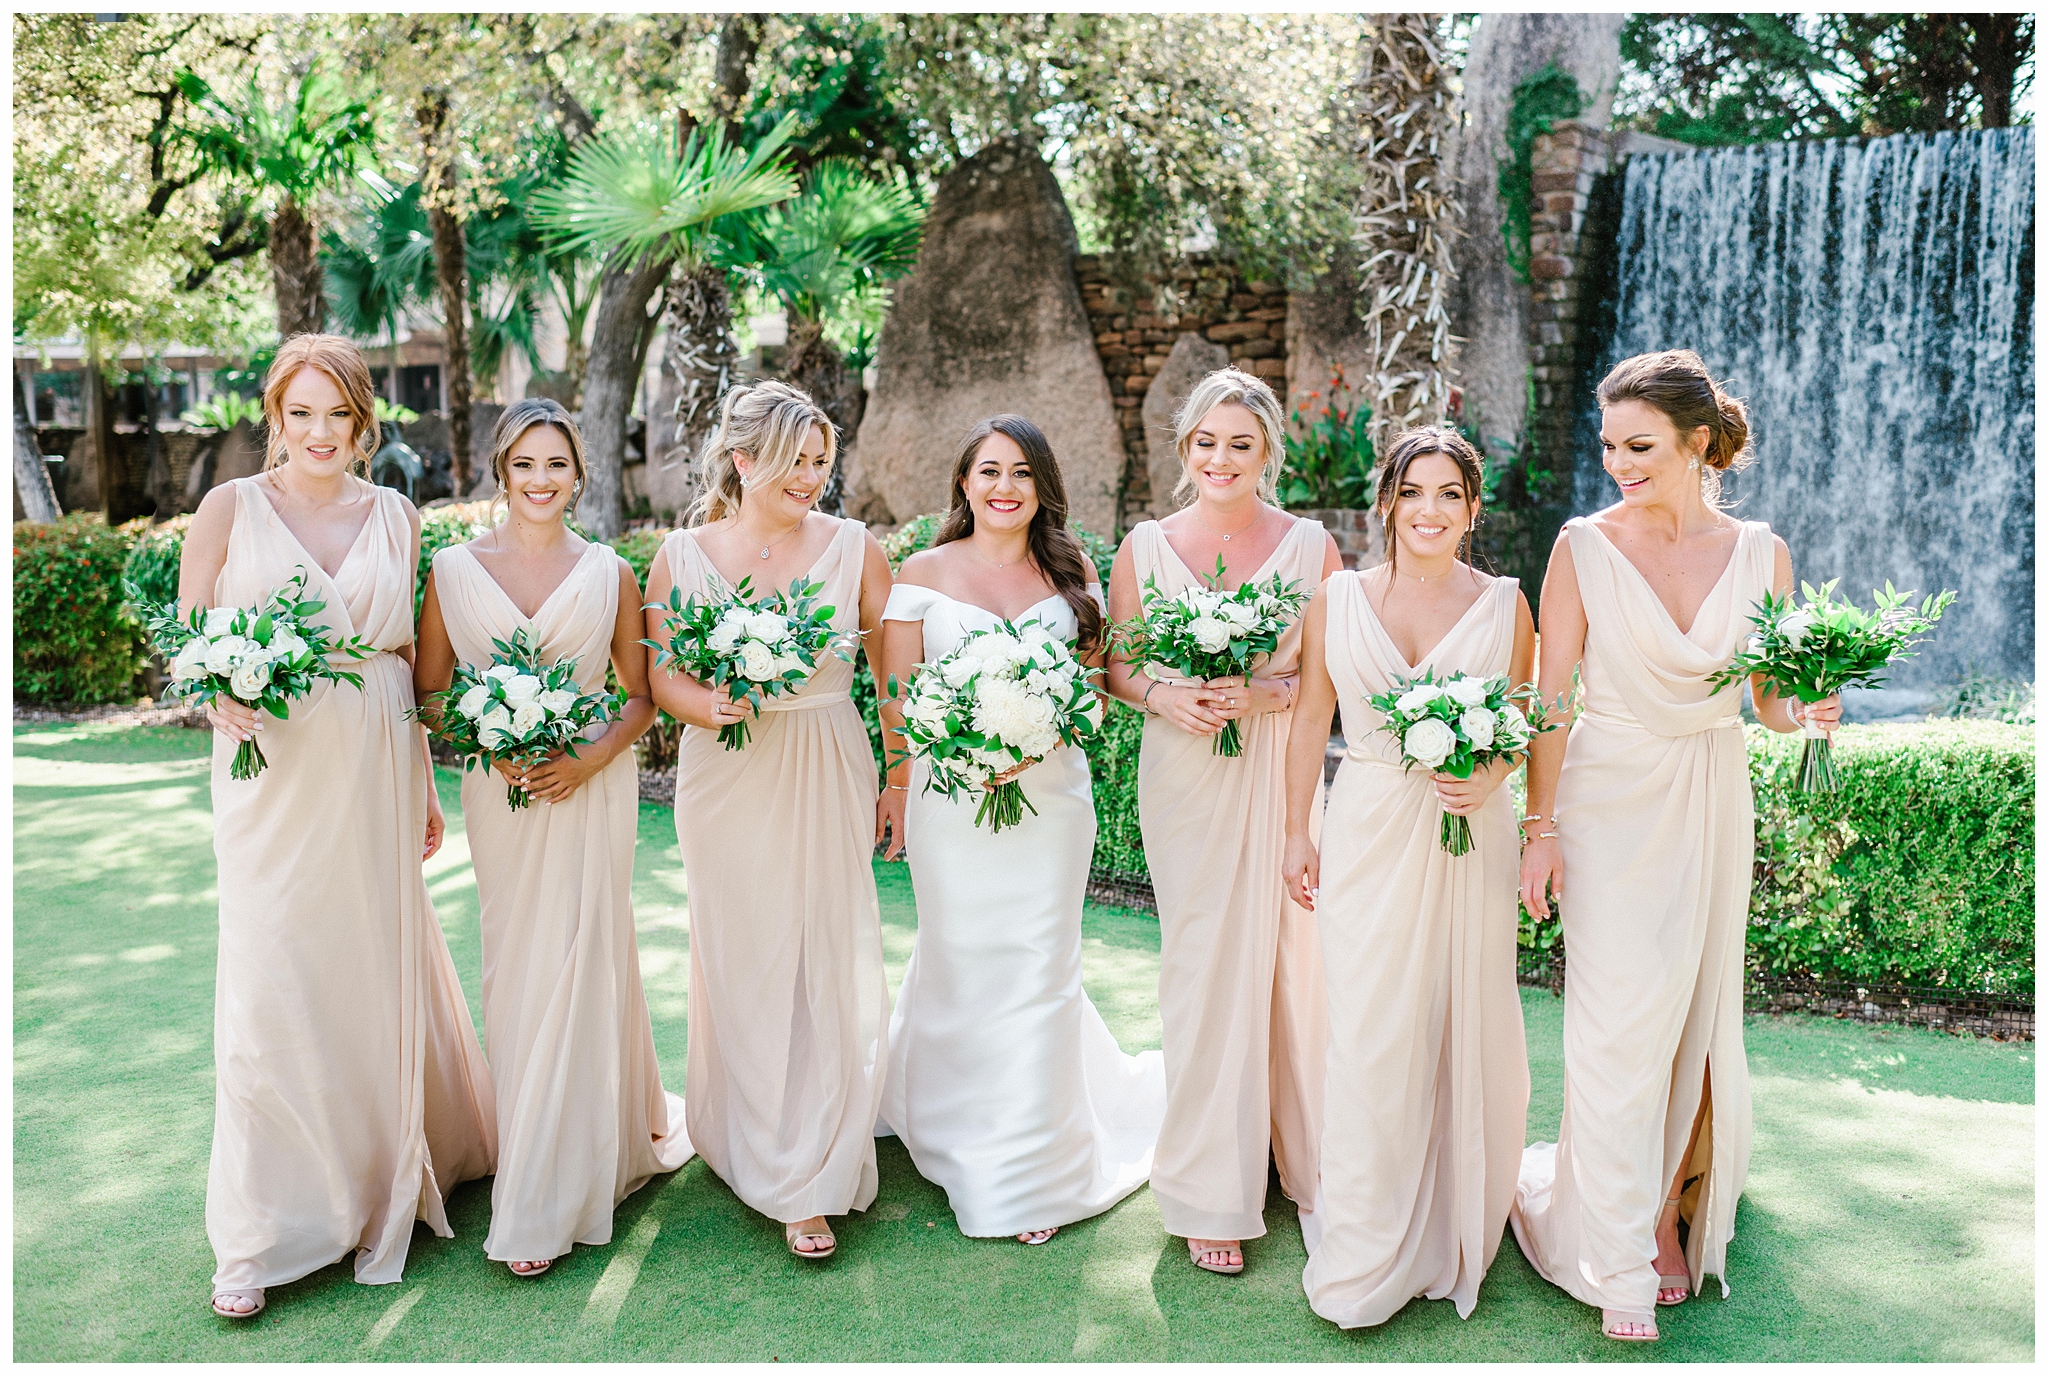 Bridesmaids in Champagne Dresses with Neutral Florals